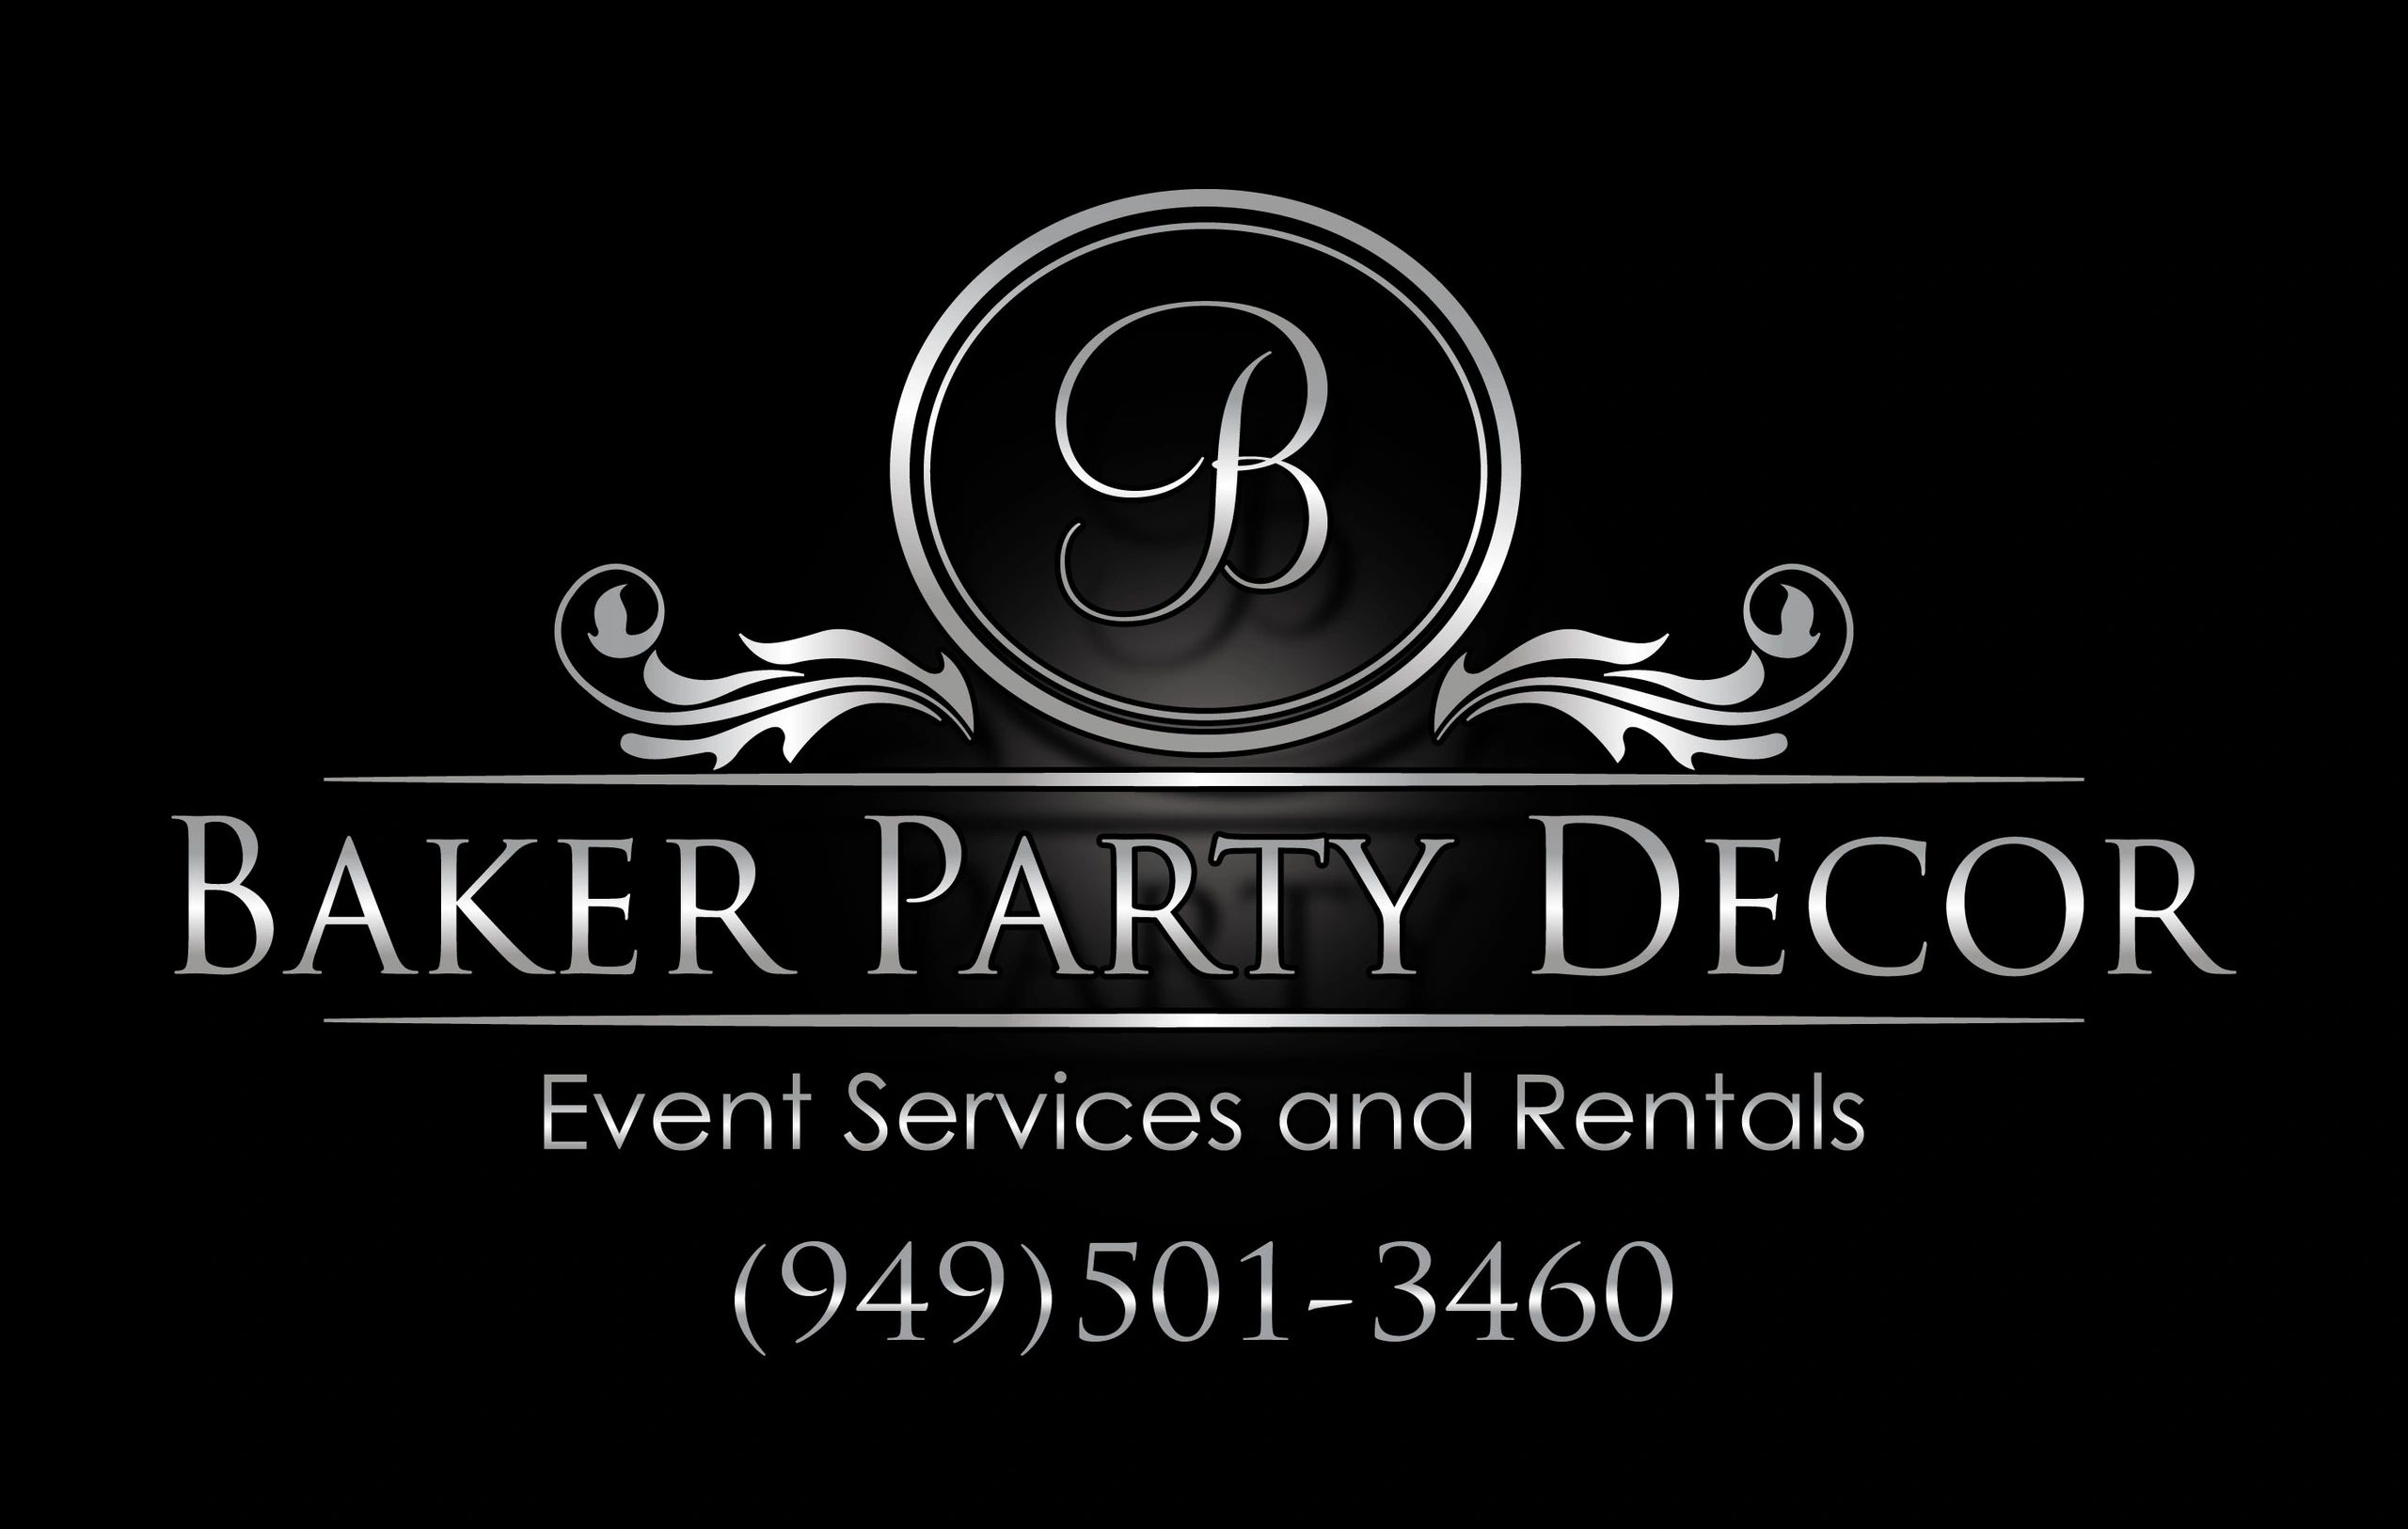 Baker Party Decor - Party Decor, Rental, Event and Party Planning